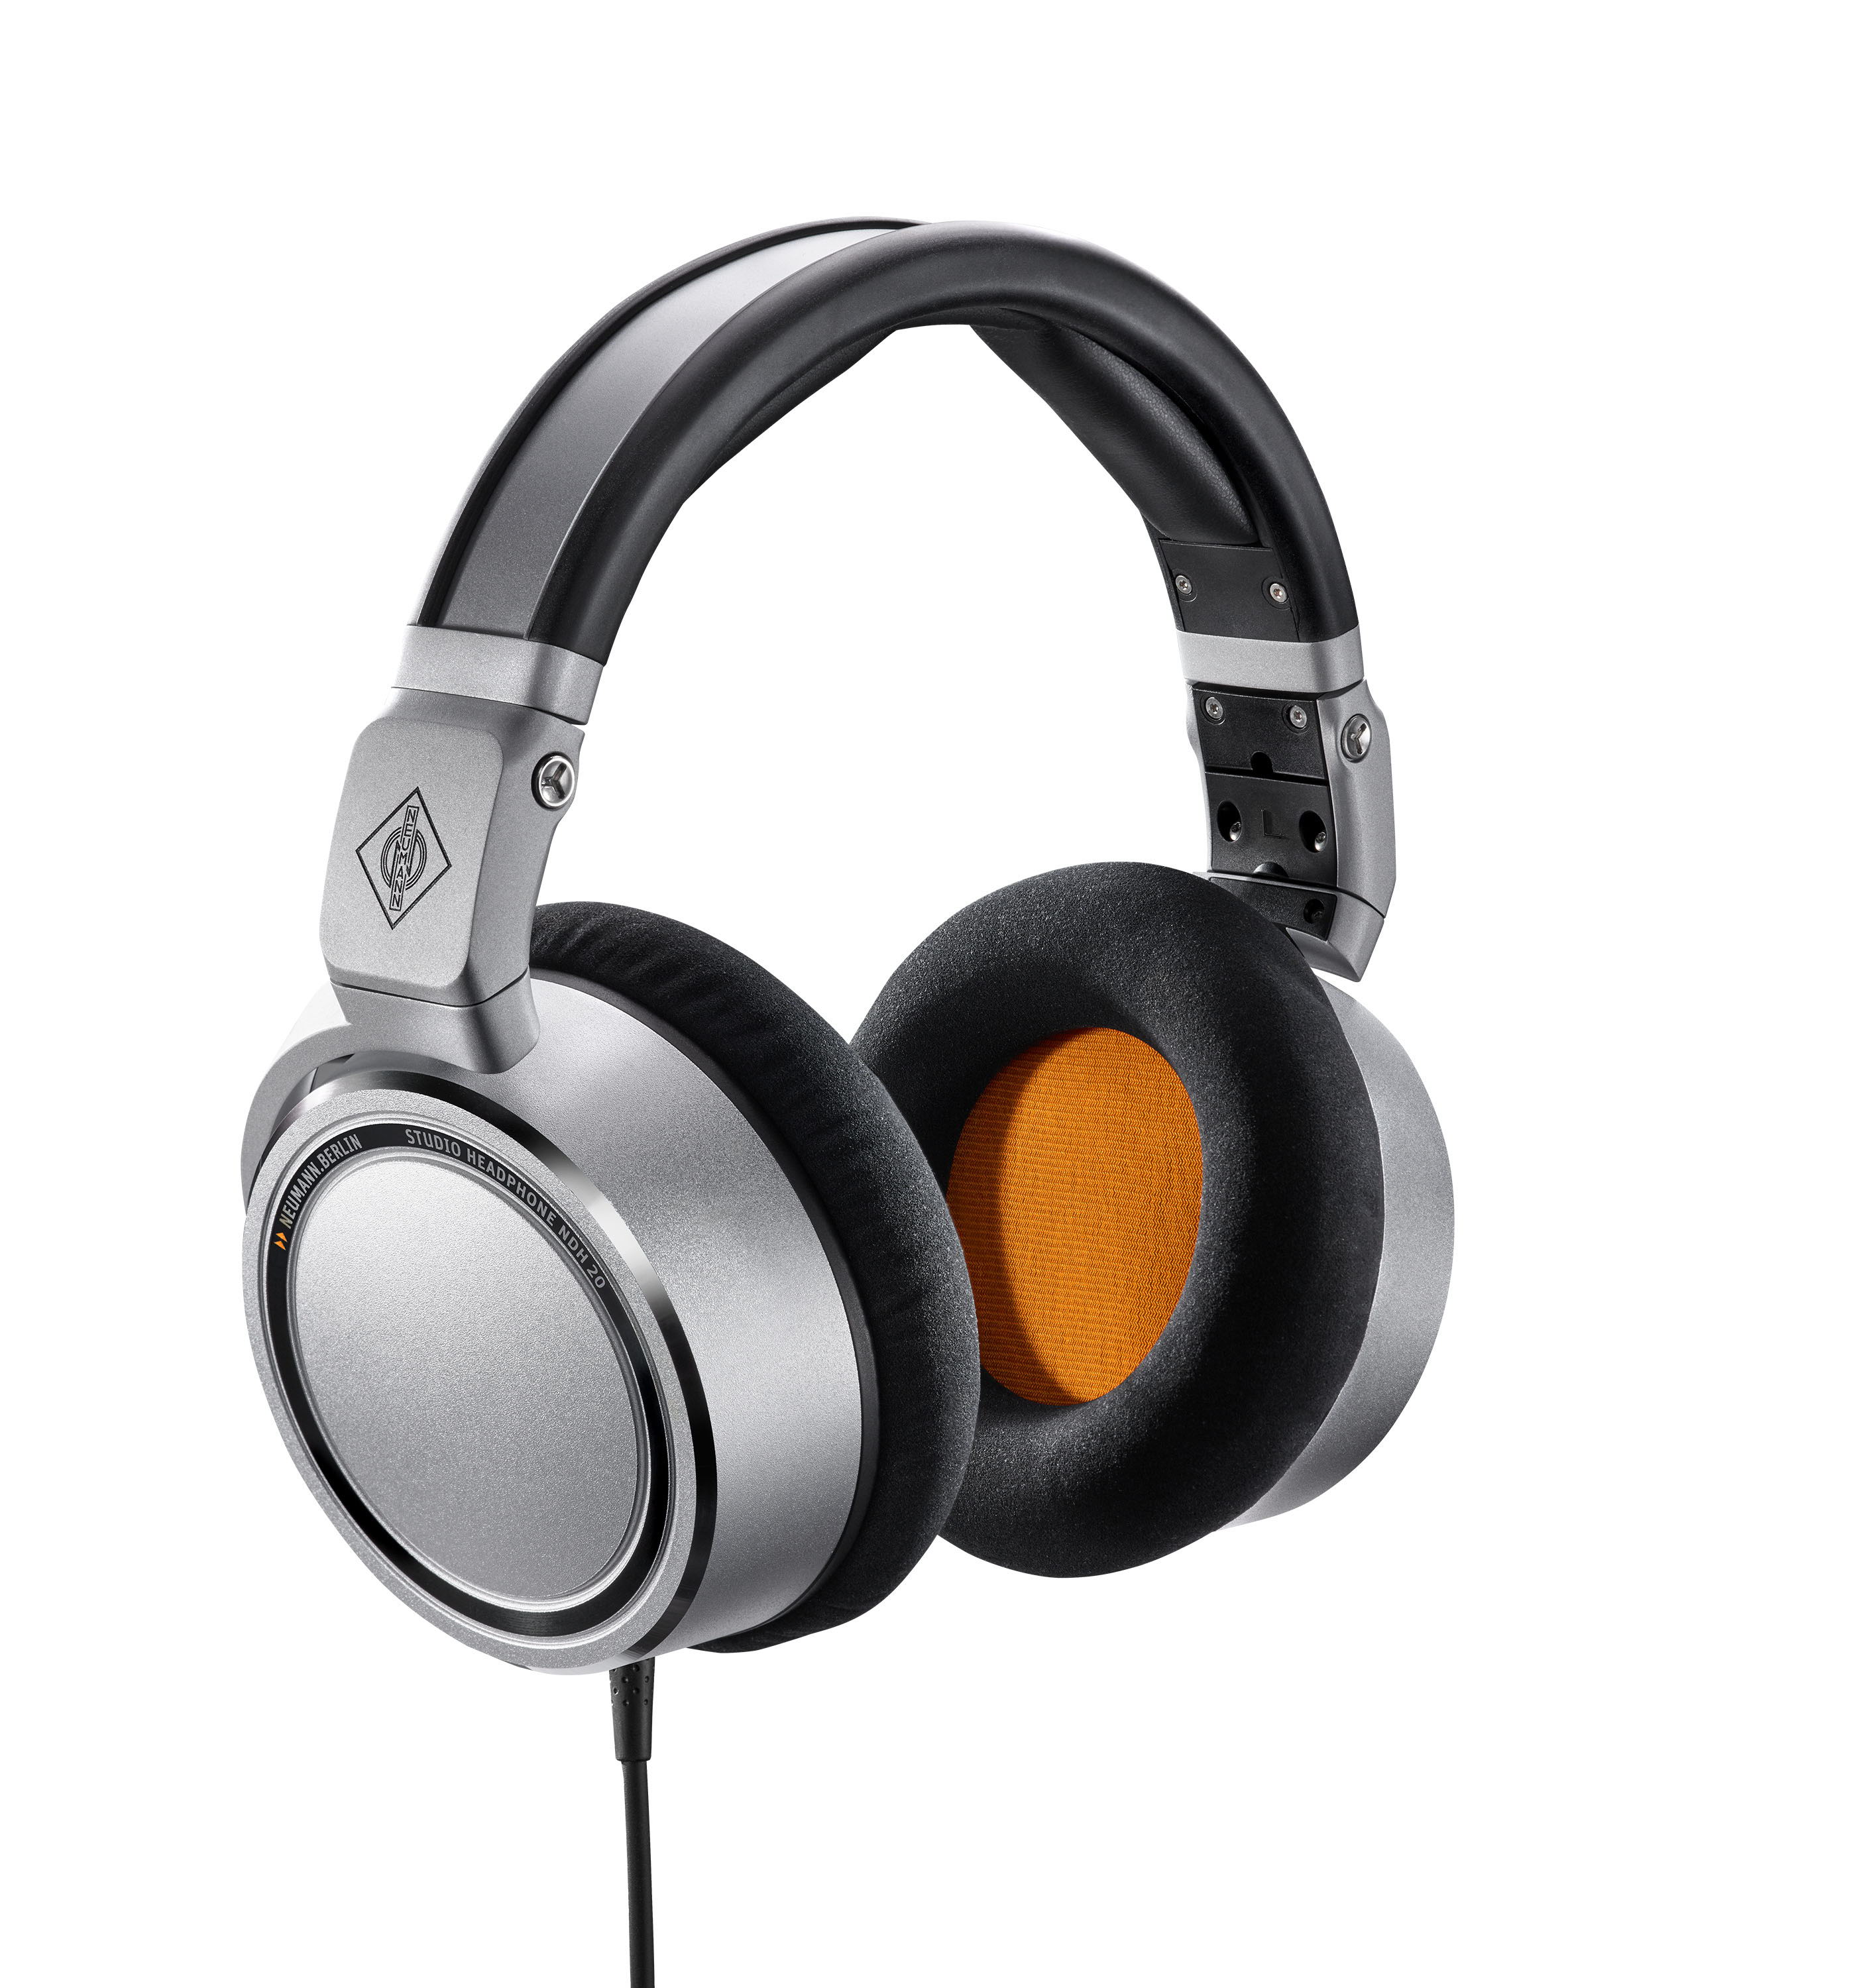 The Neumann NDH 20 is a closed-back studio headphone with a flat frequency response and natural, detailed sound